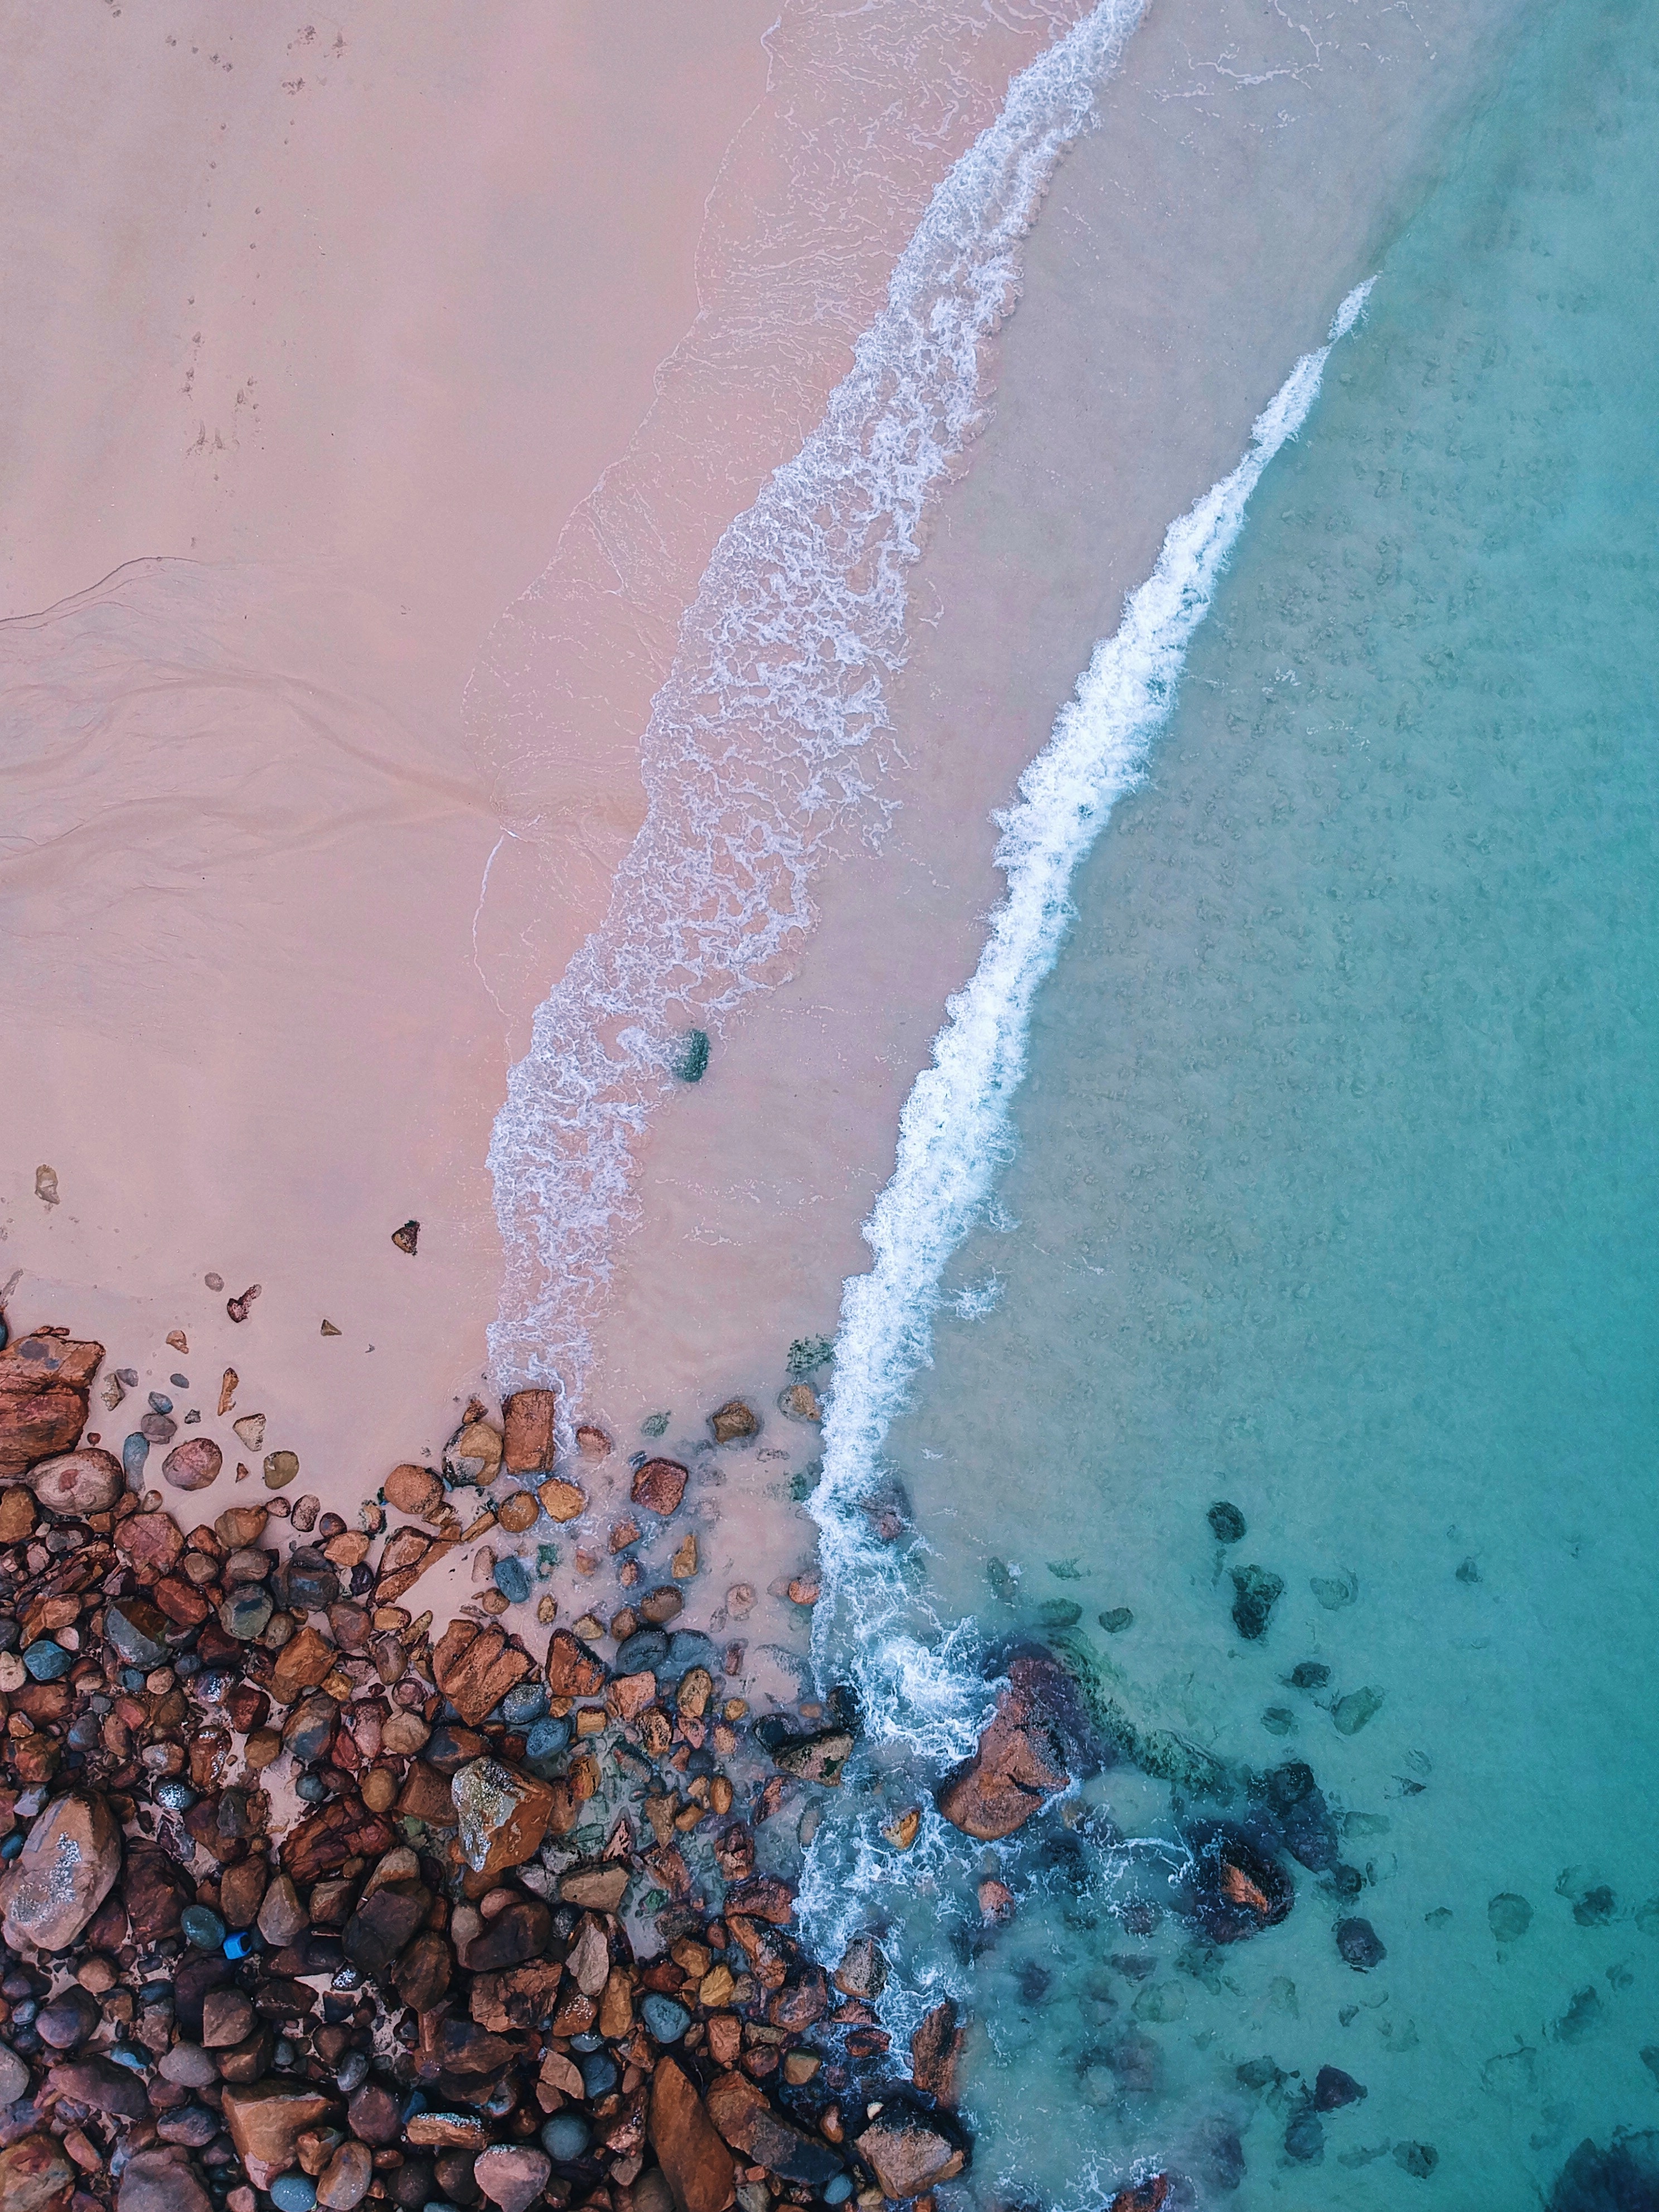 view from above, nature, beach, ocean, surf, sand, stones, foam images